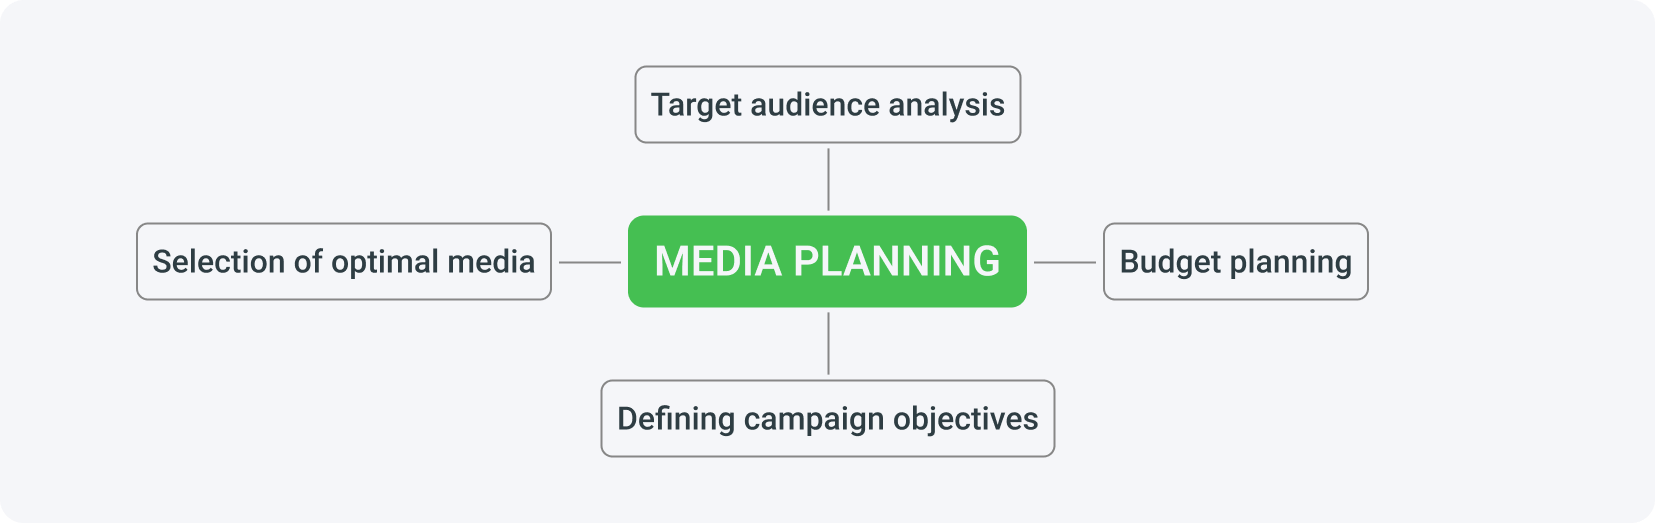 Media planning primarily involves analyzing the target group, defining campaign objectives, choosing optimal media, and budget planning.